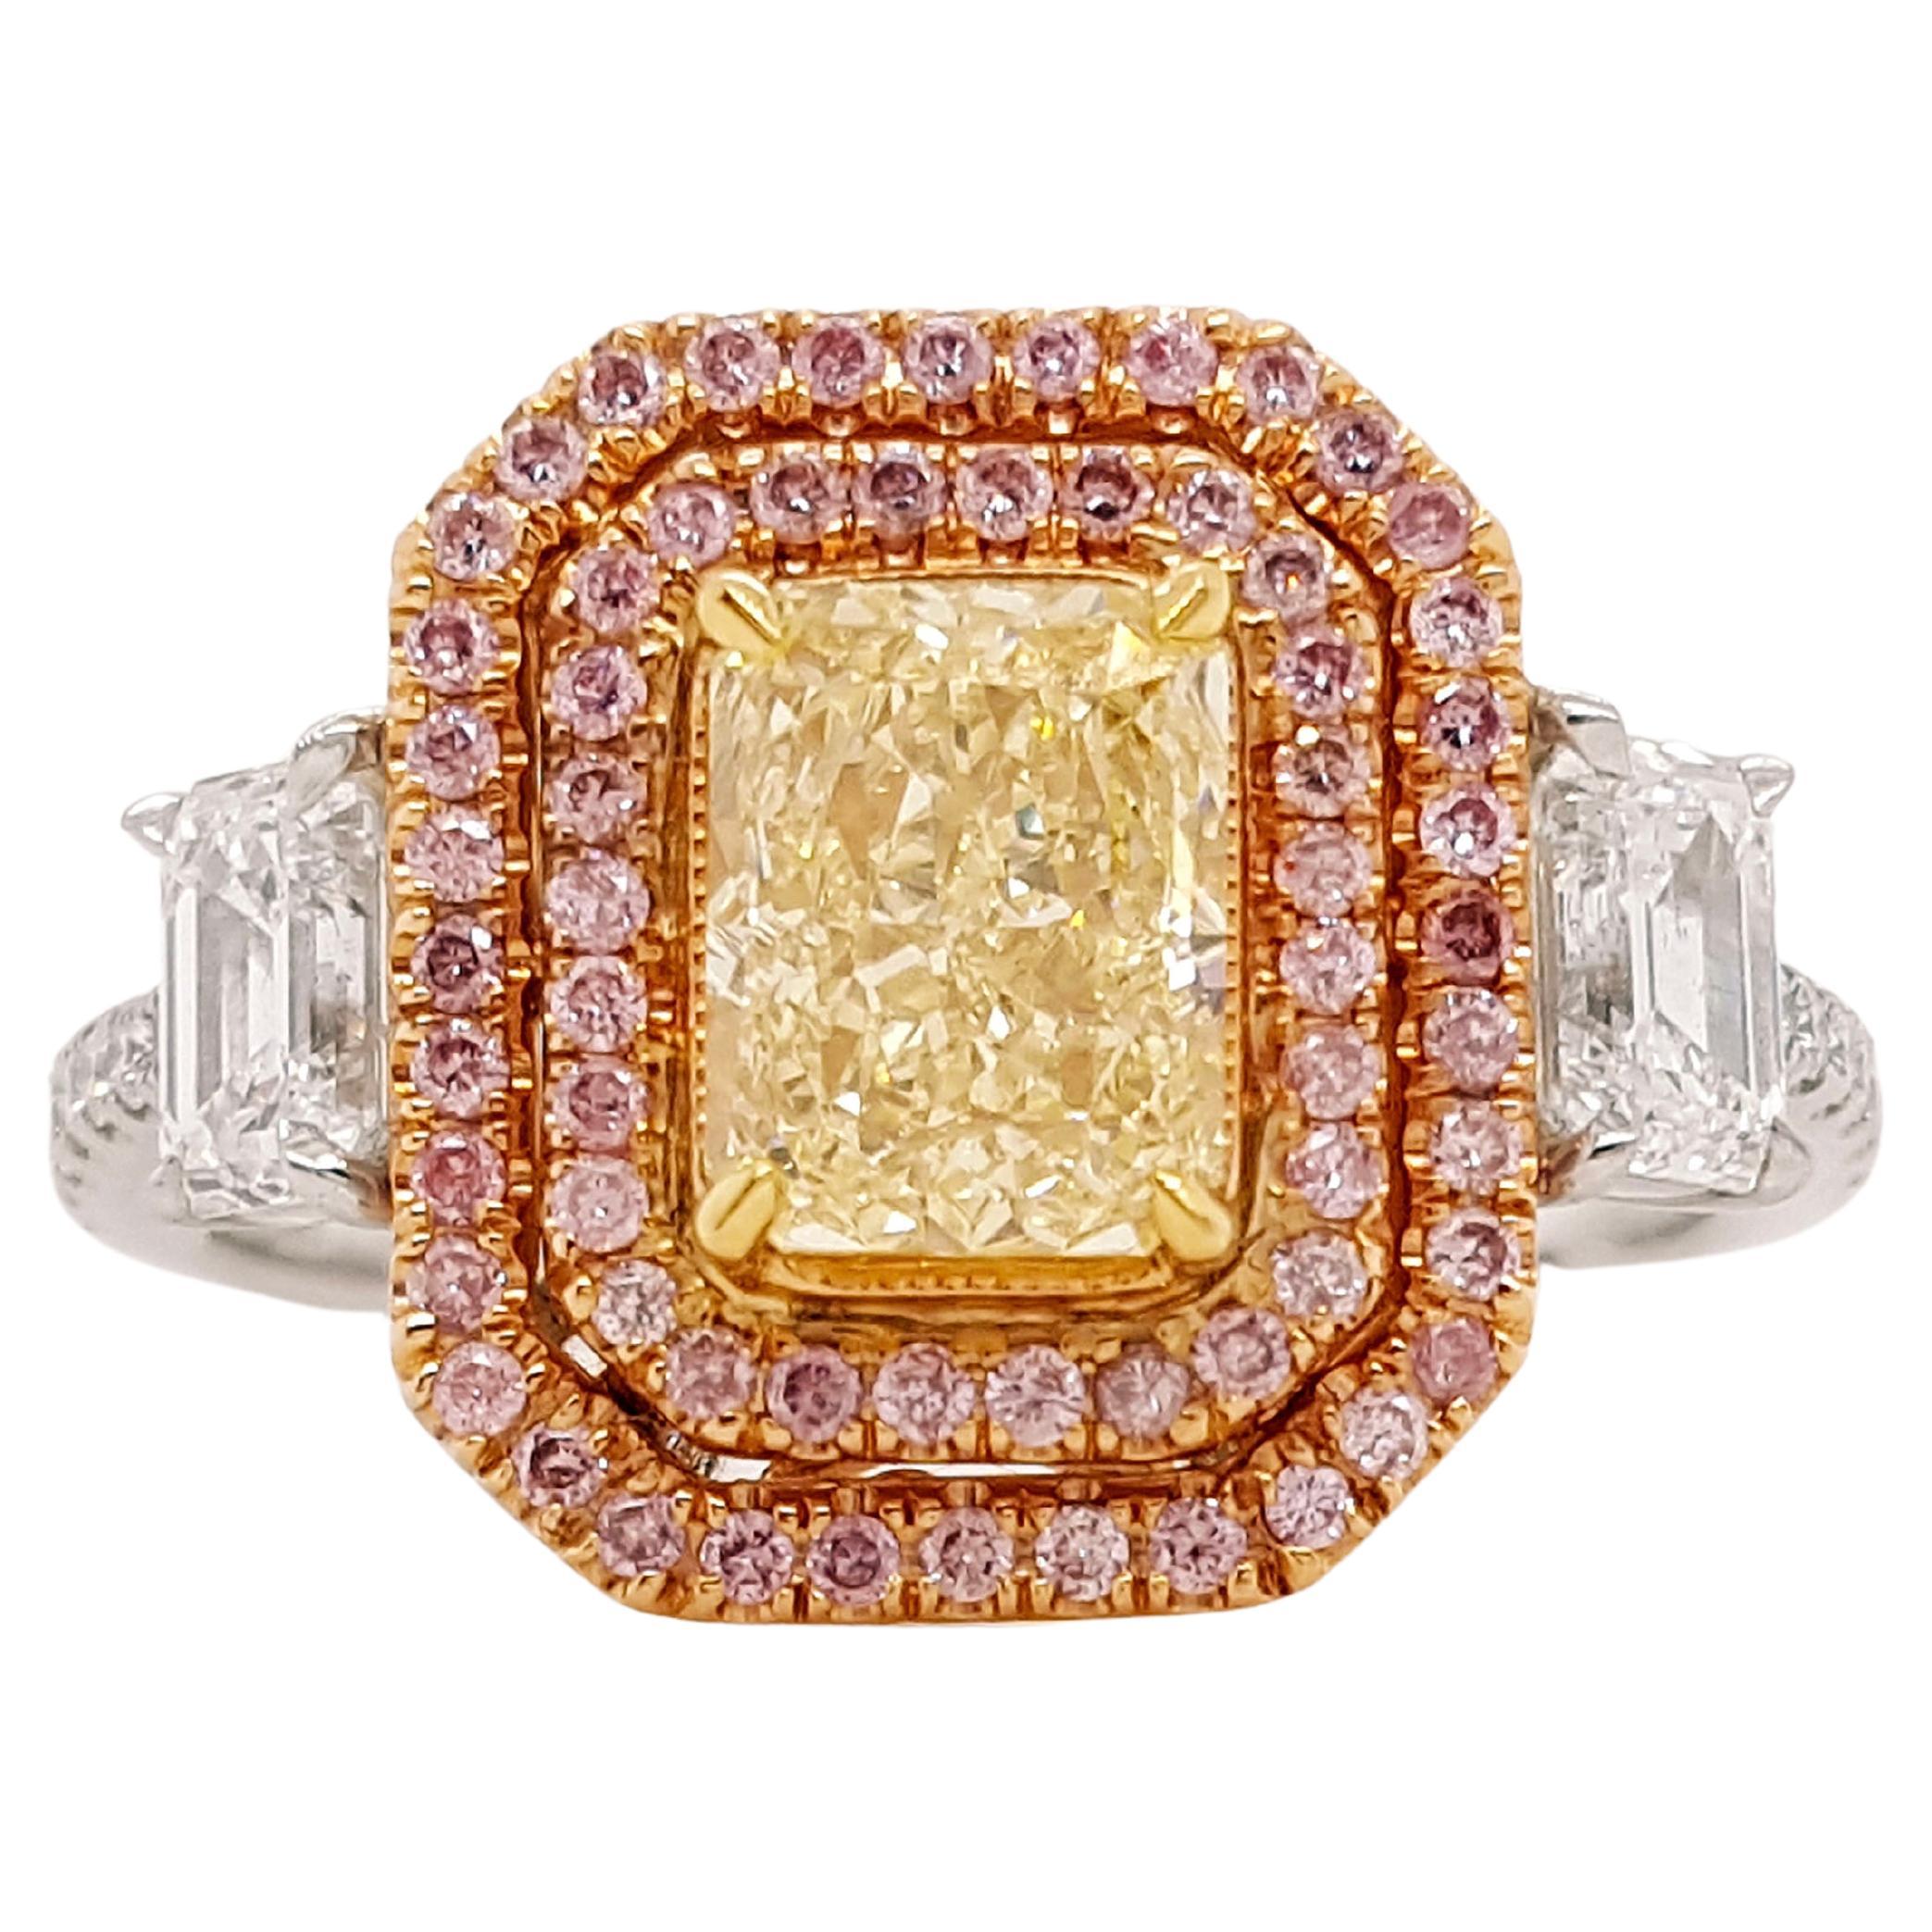 2.25 Carat Fancy Yellow and Pink Diamond Engagement 3 Stones Ring, GIA Certified For Sale